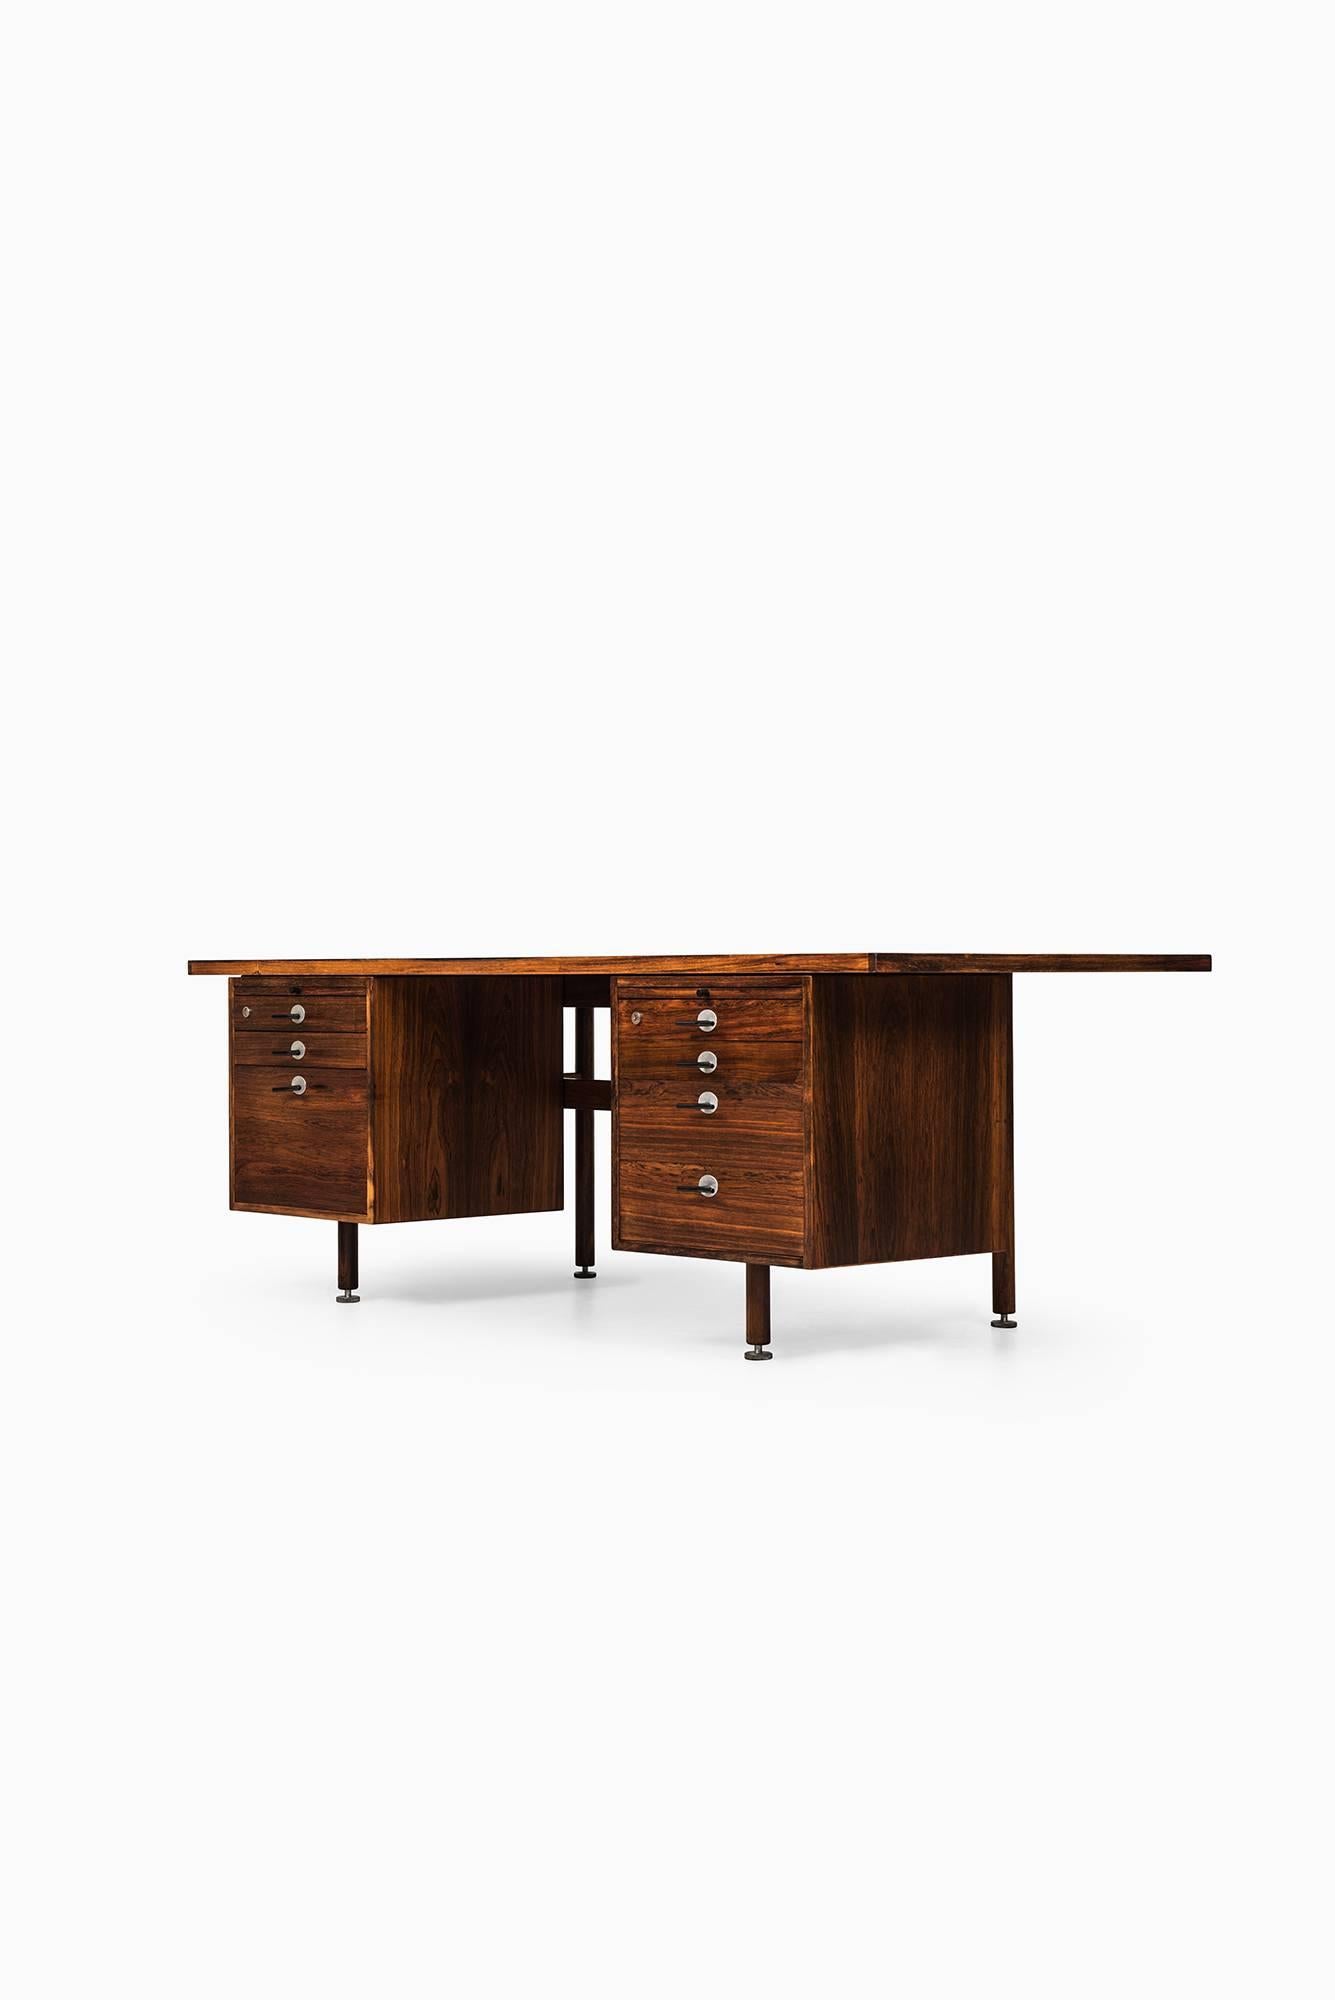 Rare large executive desk in rosewood designed by Jens Risom. Produced by Gutenberghus in Denmark.